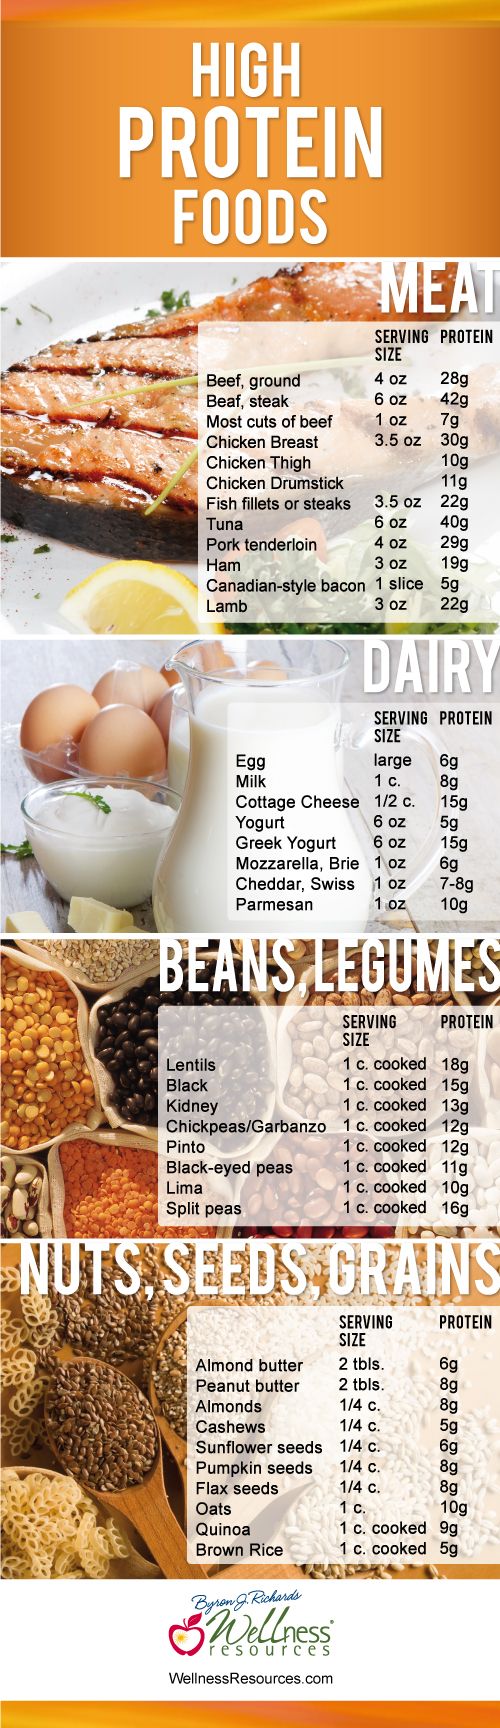 high protein grains and beans